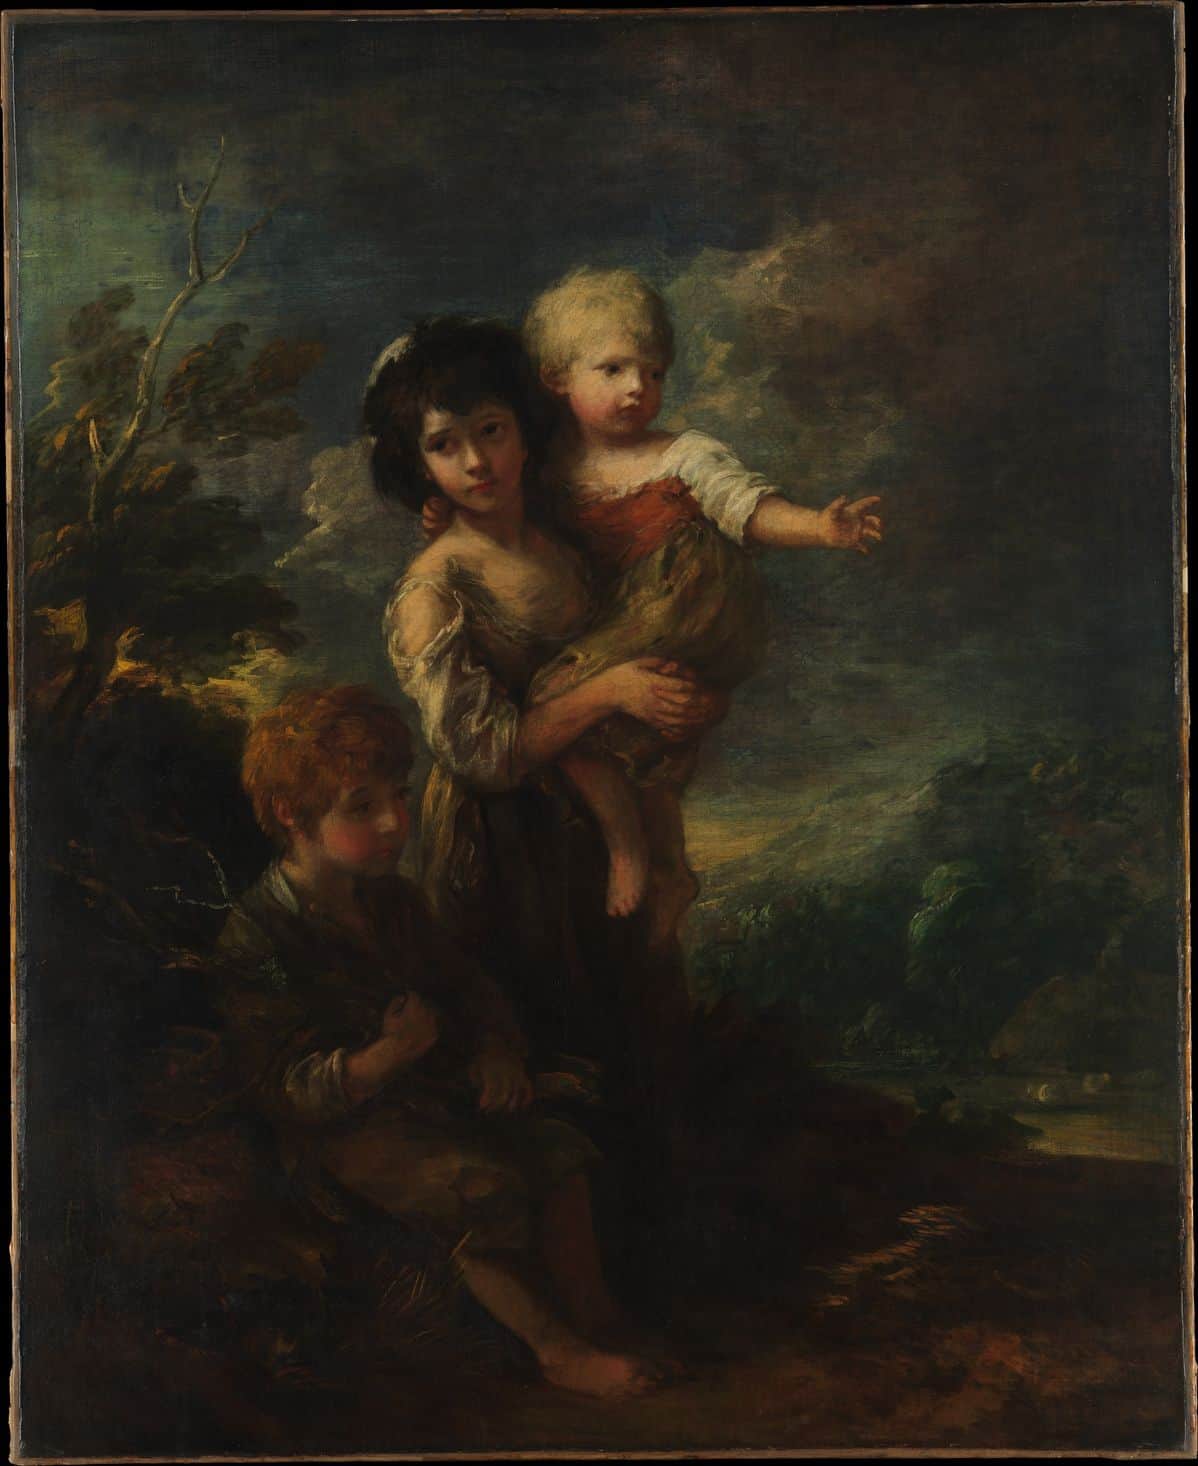 Cottage Children (The Wood Gatherers), 1787, Thomas Gainsborough, The Metropolitan Museum of Art (article on inner child quotes)